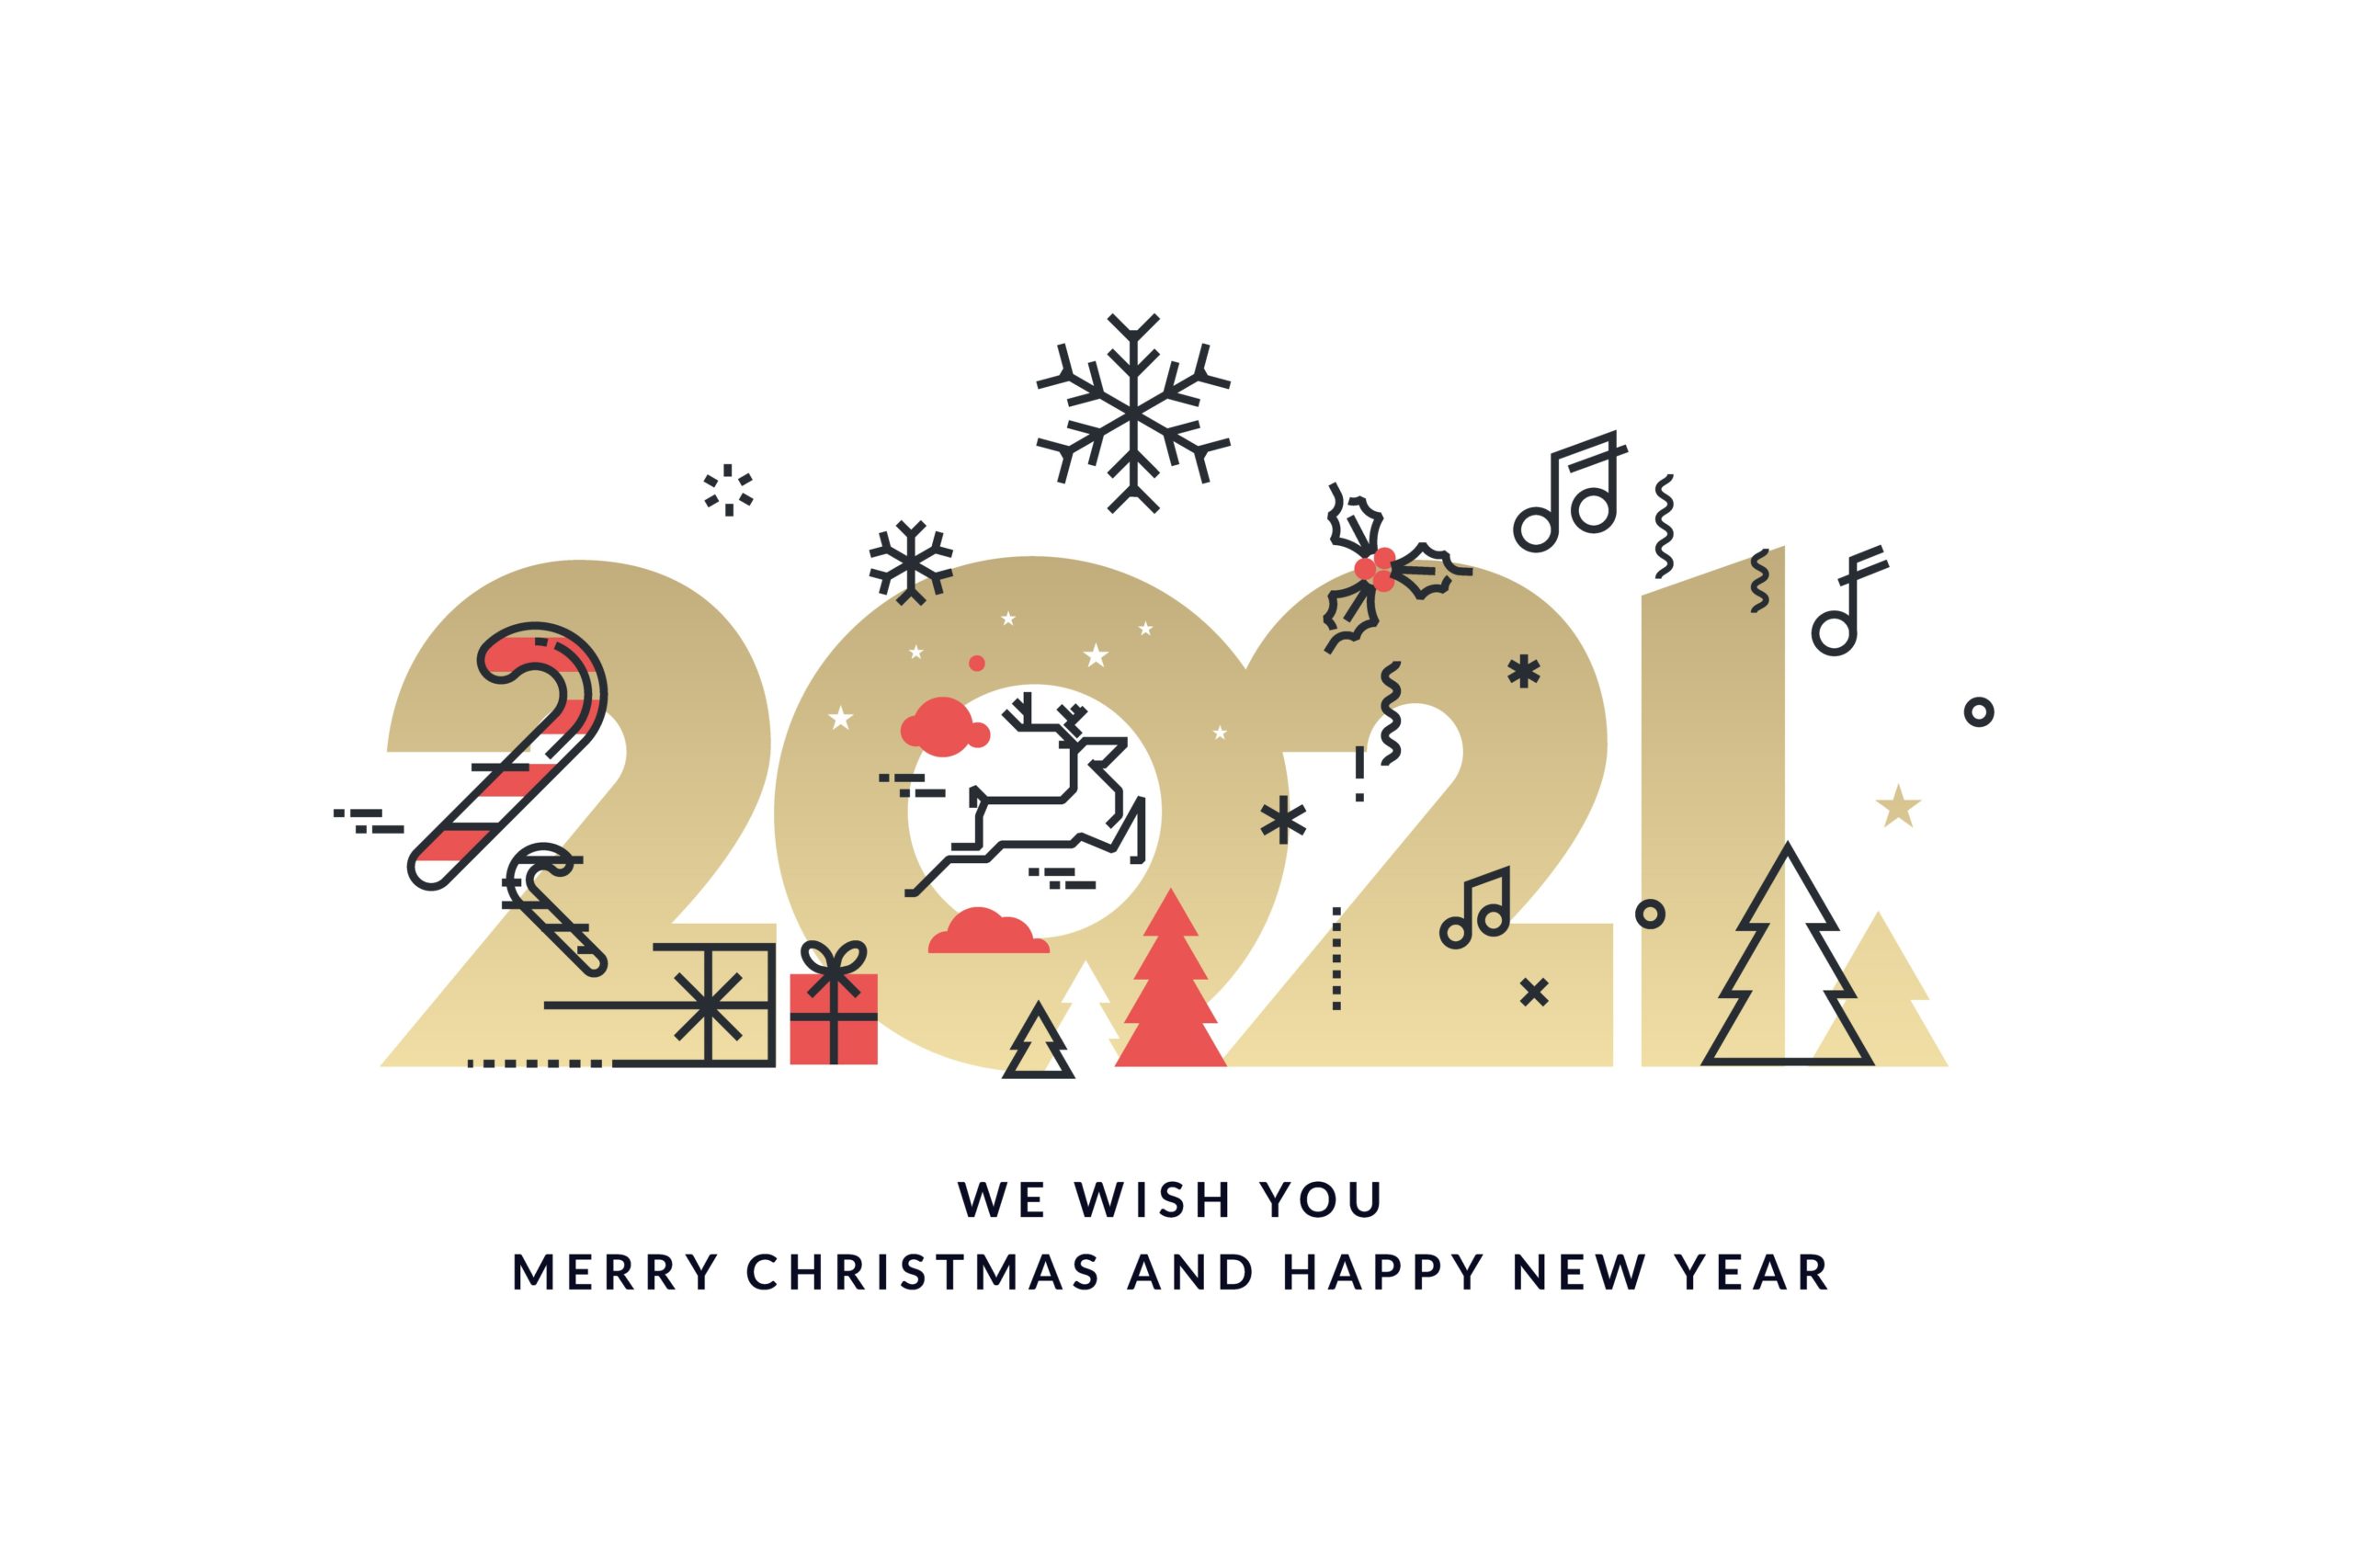 Merry Christmas 2021 Images | Free Vectors